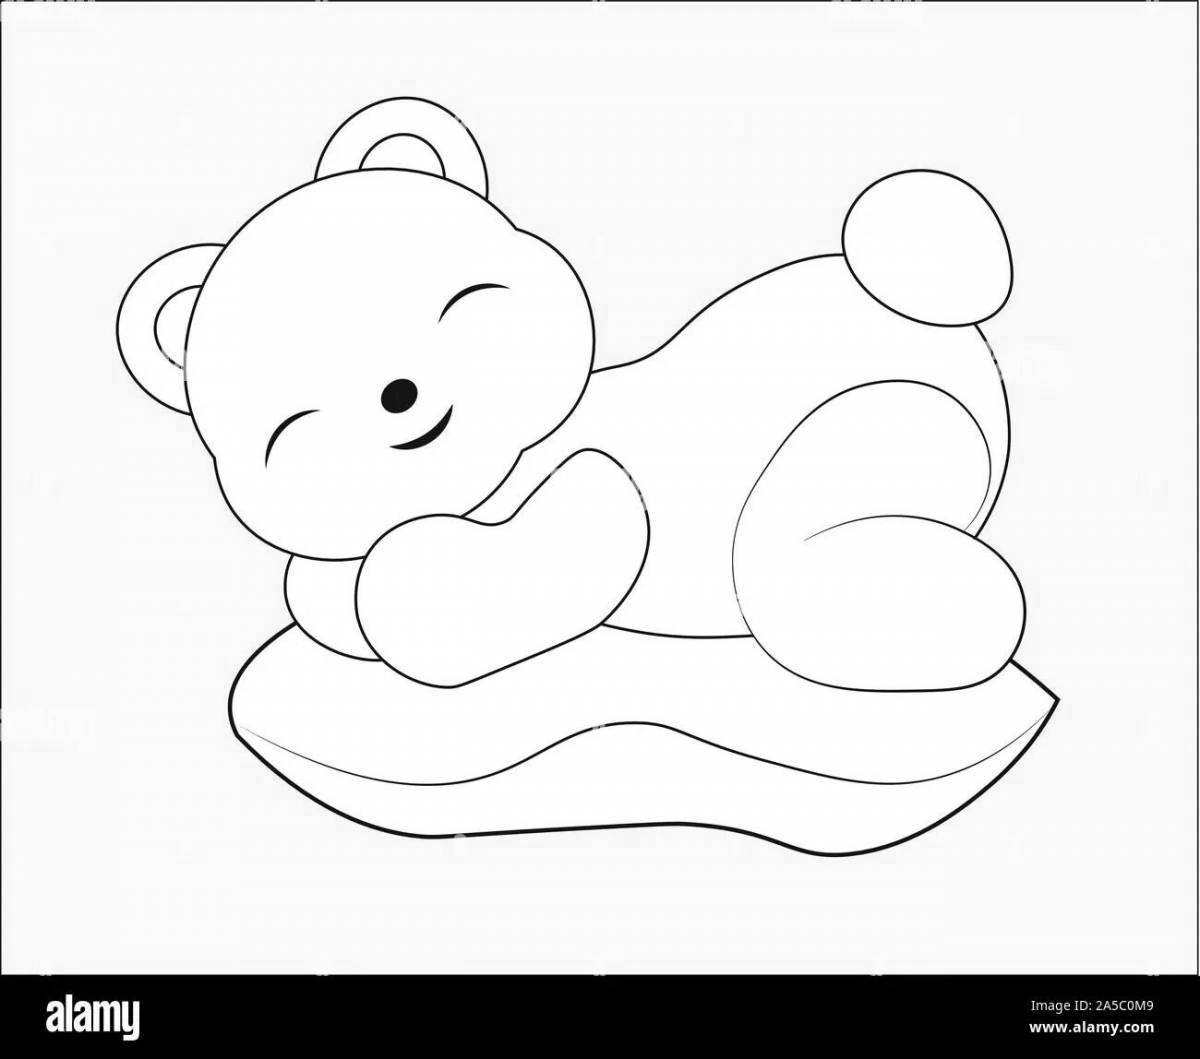 Relaxed sleeping bear coloring book